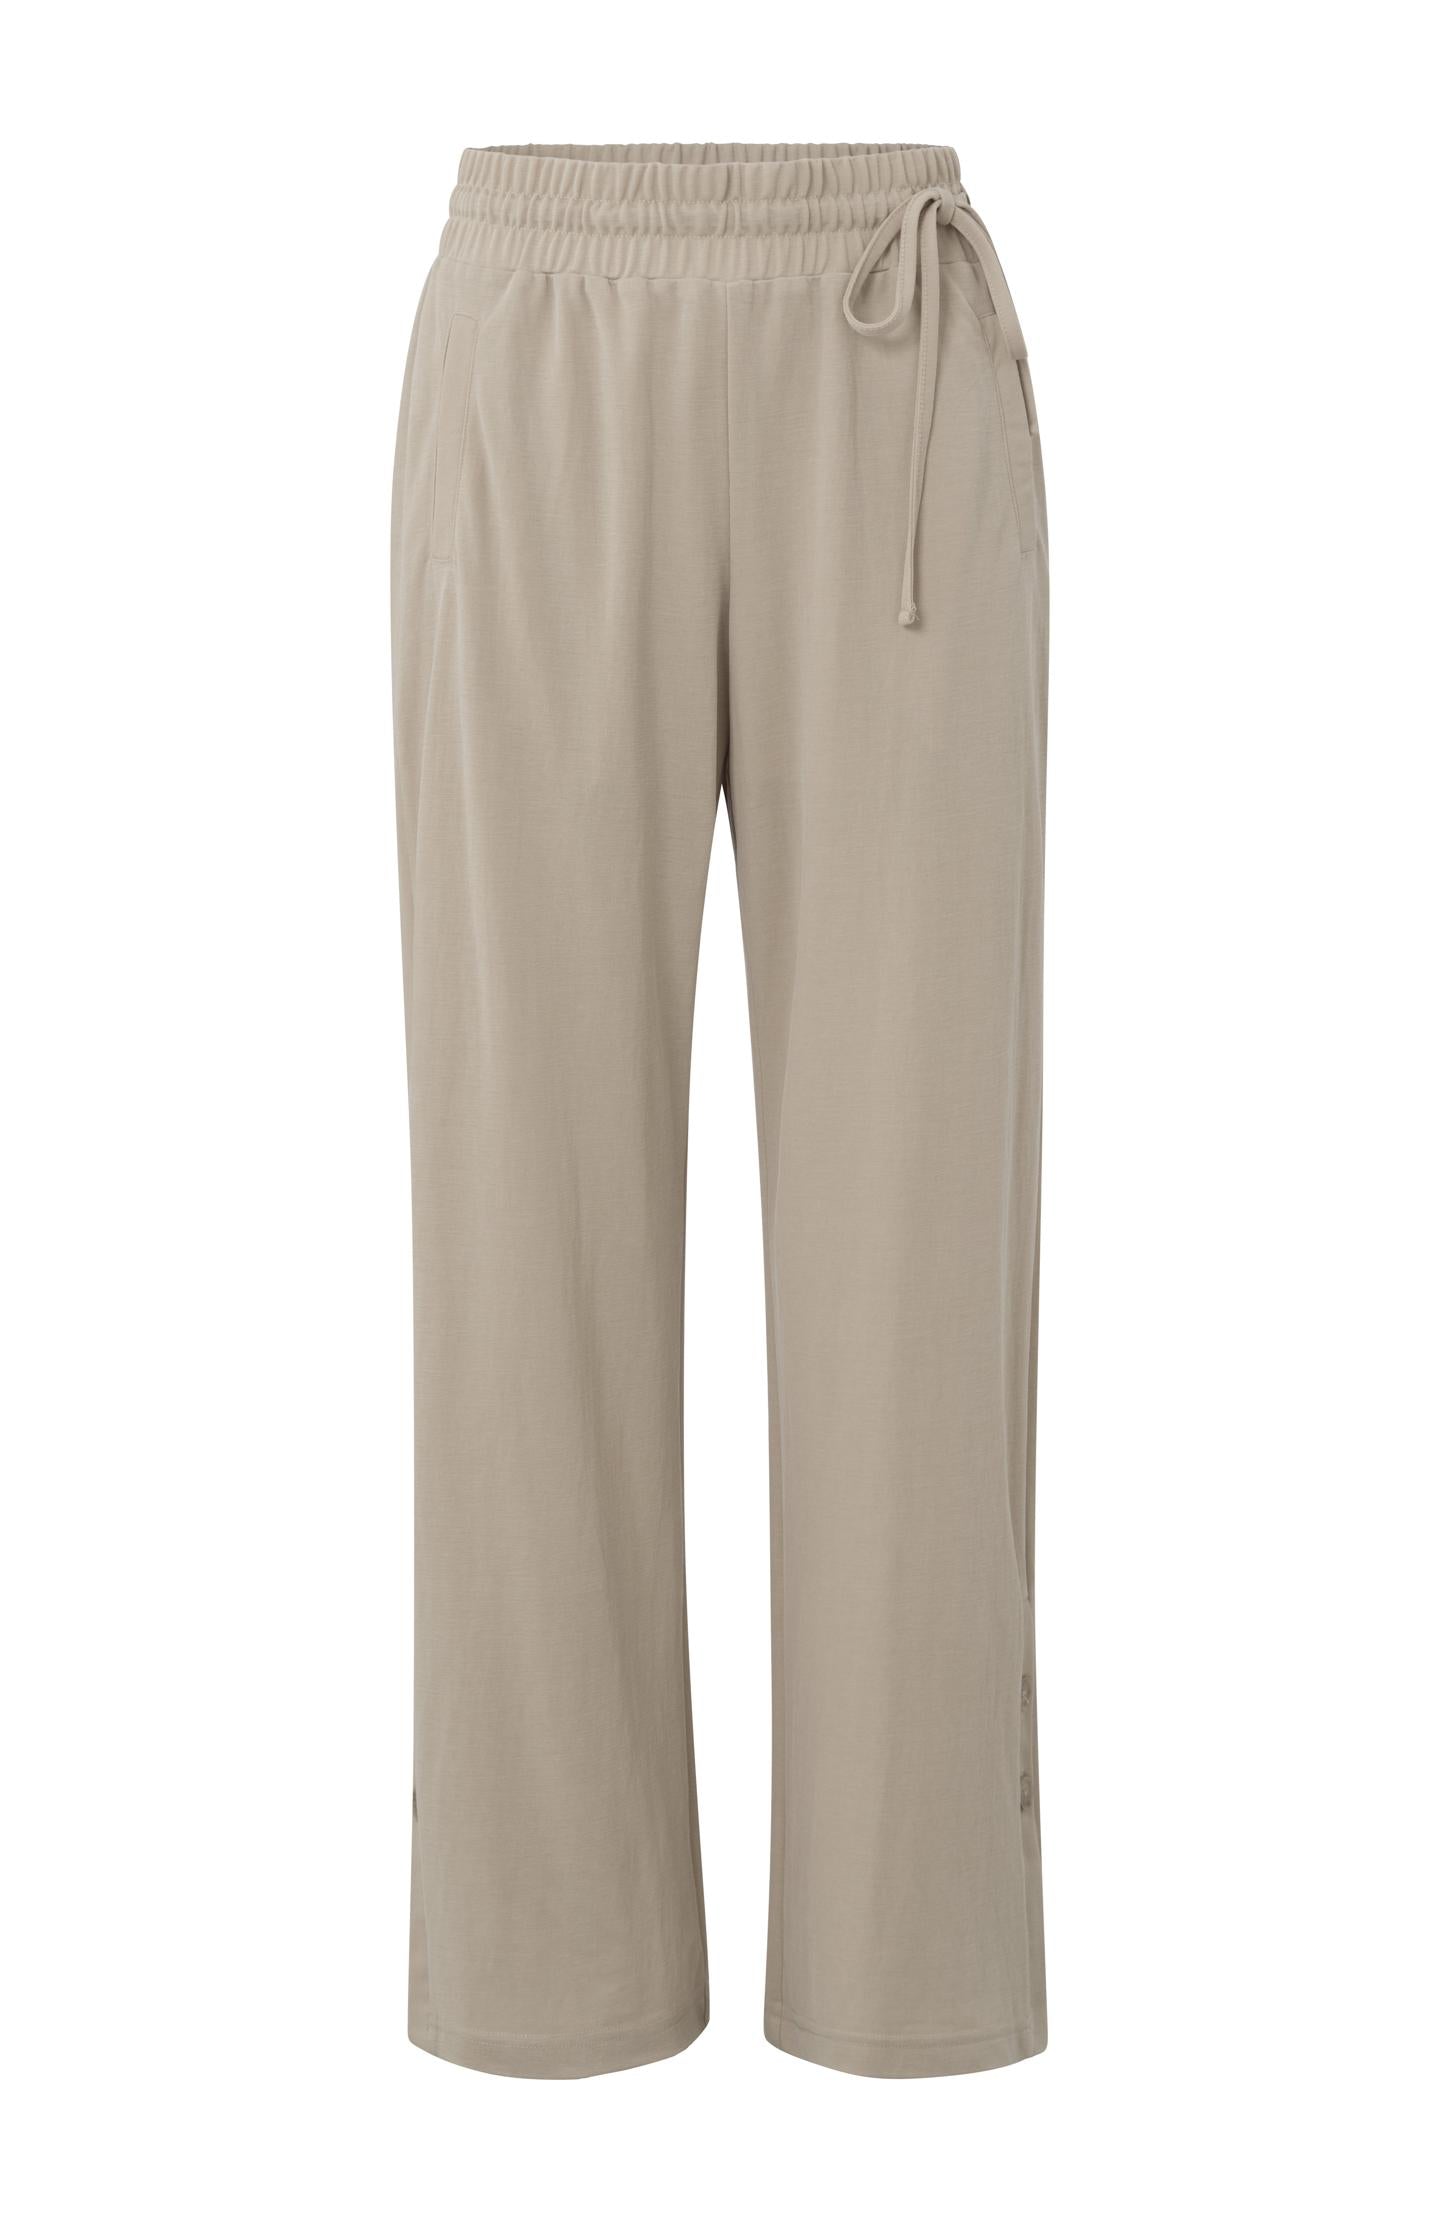 Jersey trousers with wide leg, elastic waist and buttons - Type: product